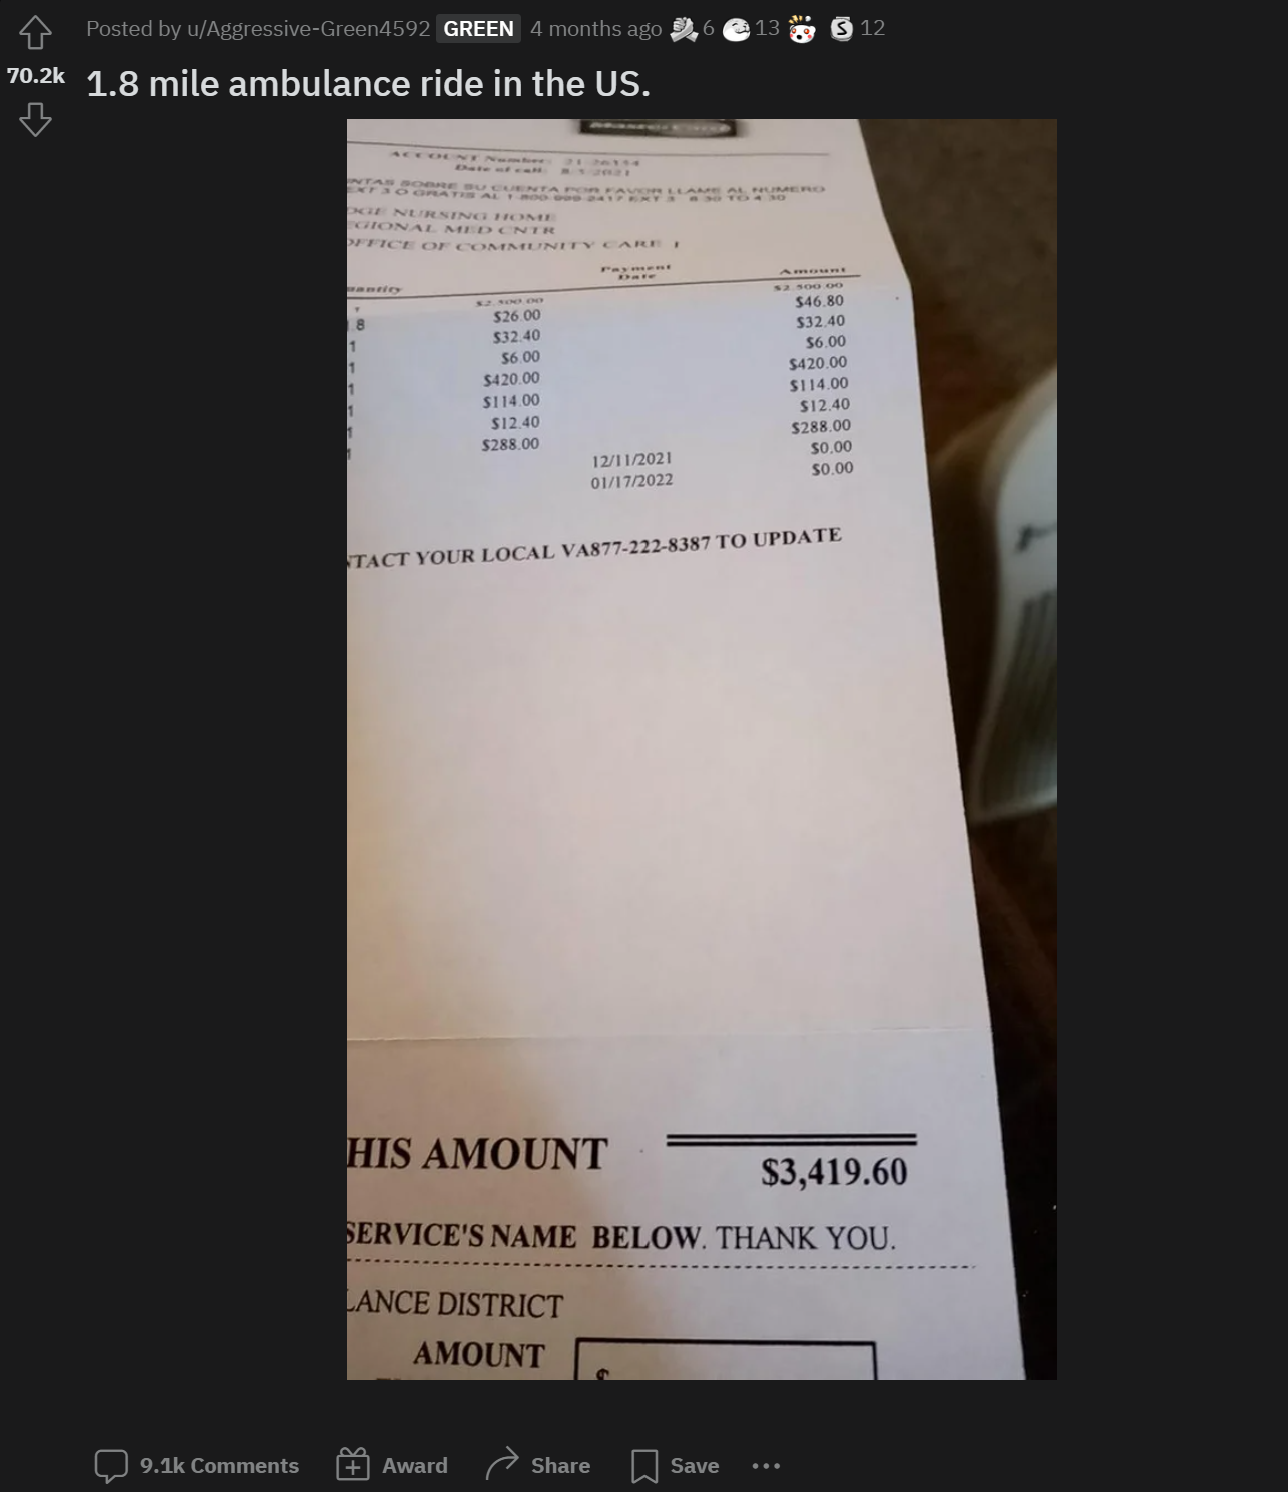 Bill for 1.8 mile ambulance ride in the U.S. totaling $3,419.60